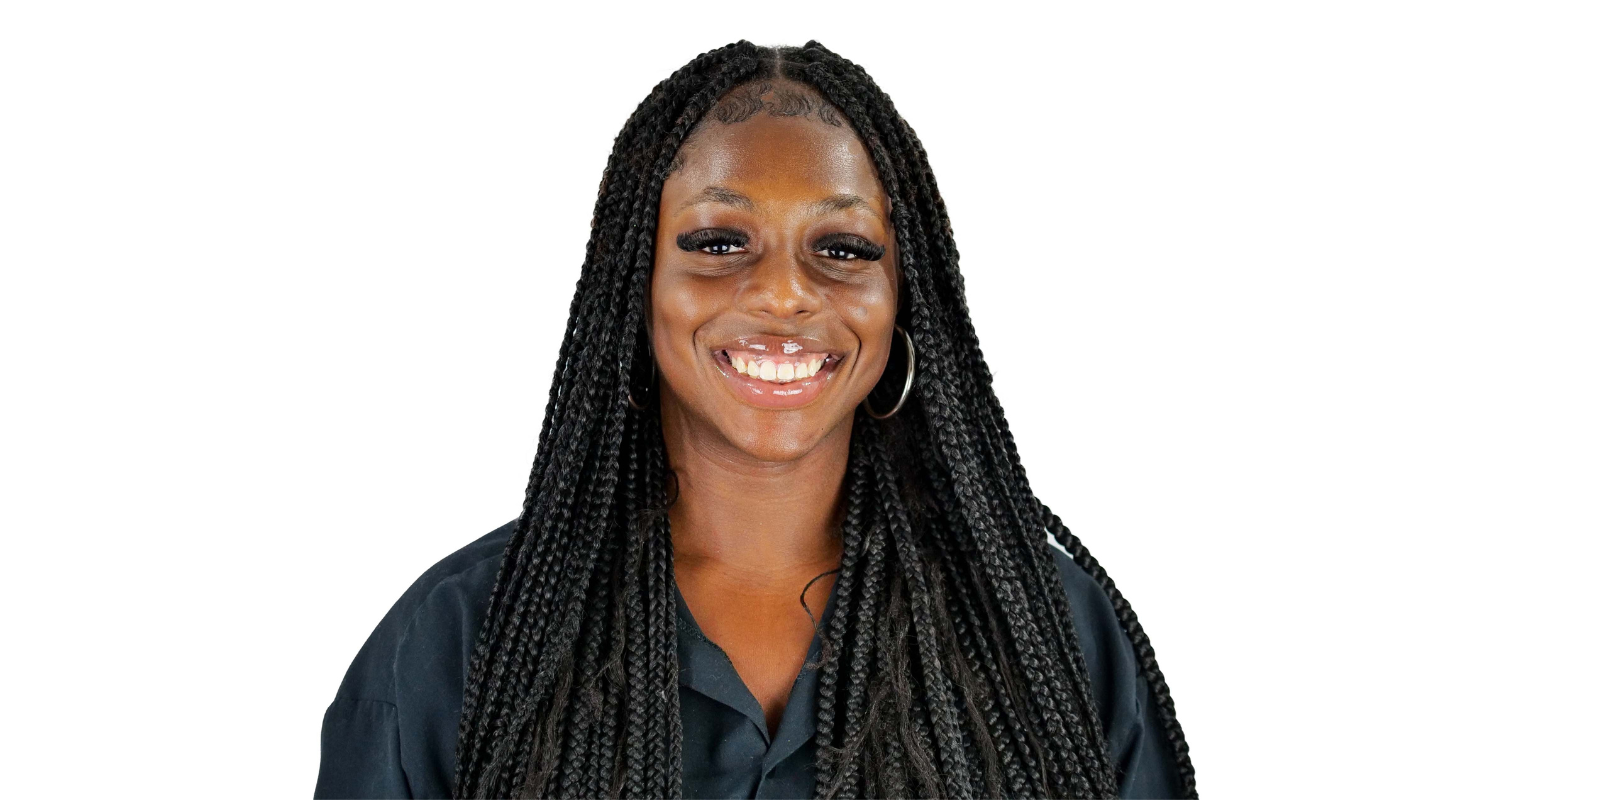 Derrica Daniel in front of a white background. She is wearing a black collared shirt.